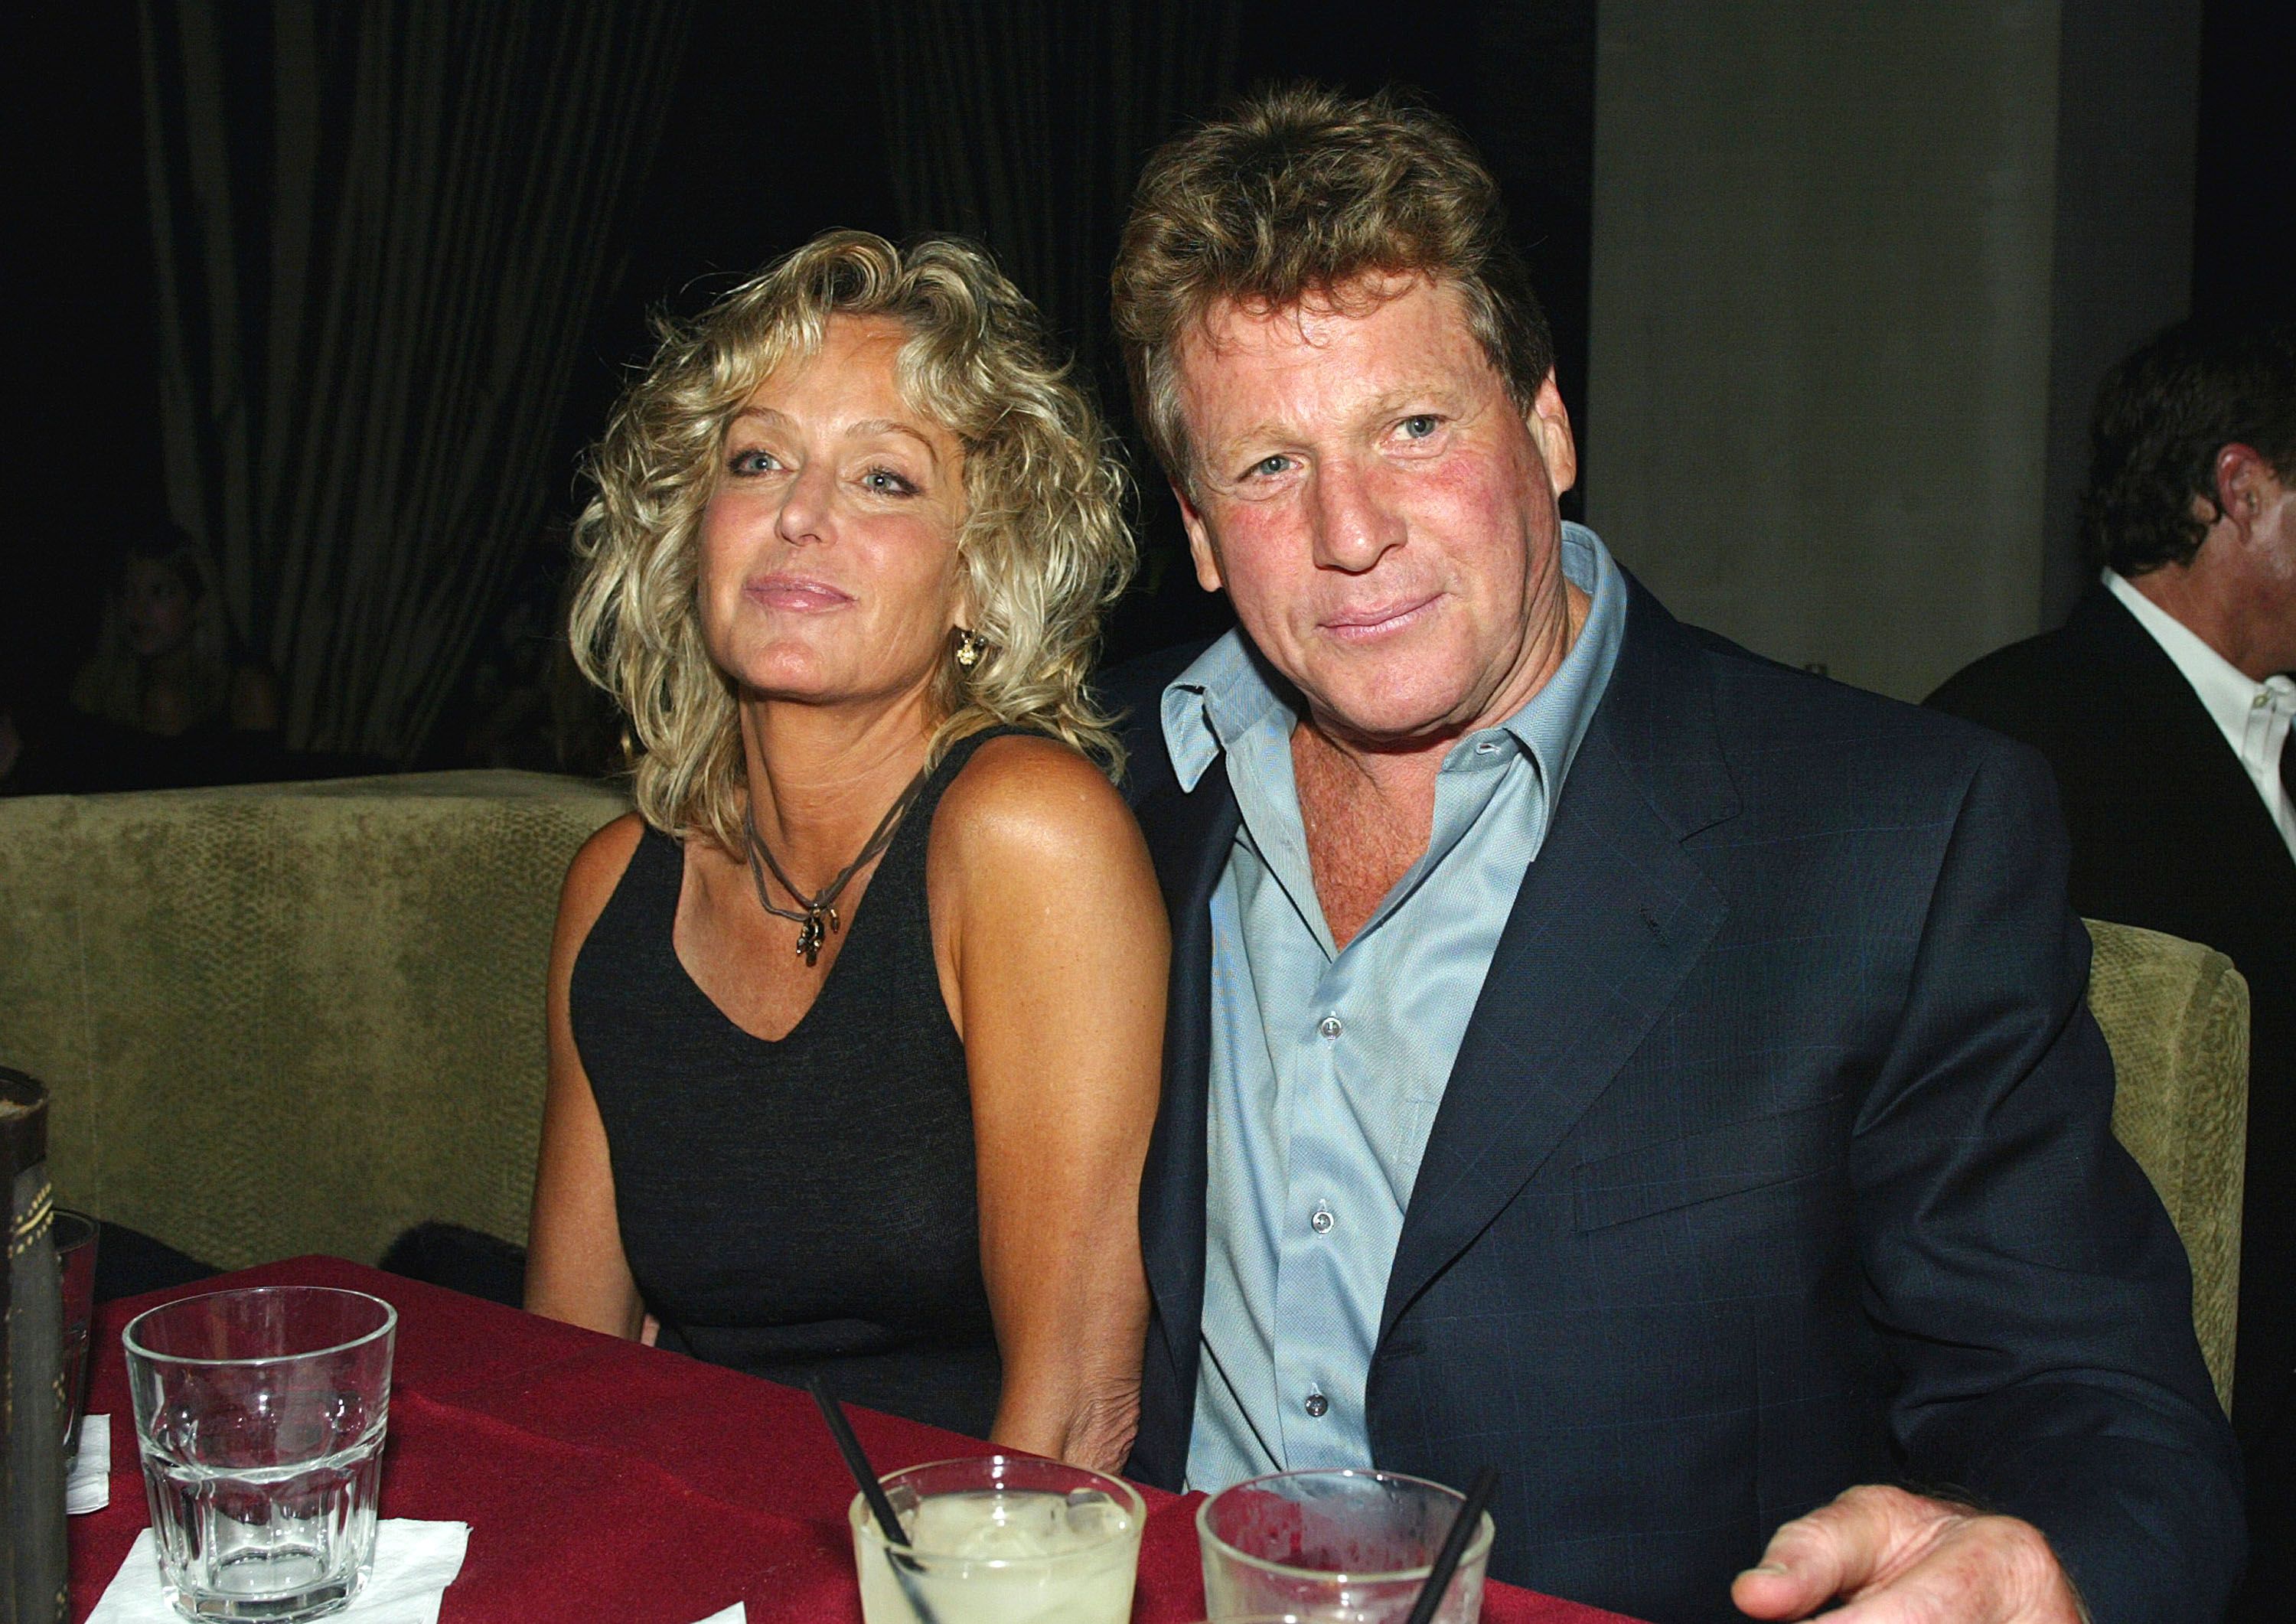 Farrah Fawcett and Ryan O'Neal during the after-party for "Malibu's Most Wanted" at the Highlands on April 10, 2003 in Los Angeles, California. | Source: Getty Images